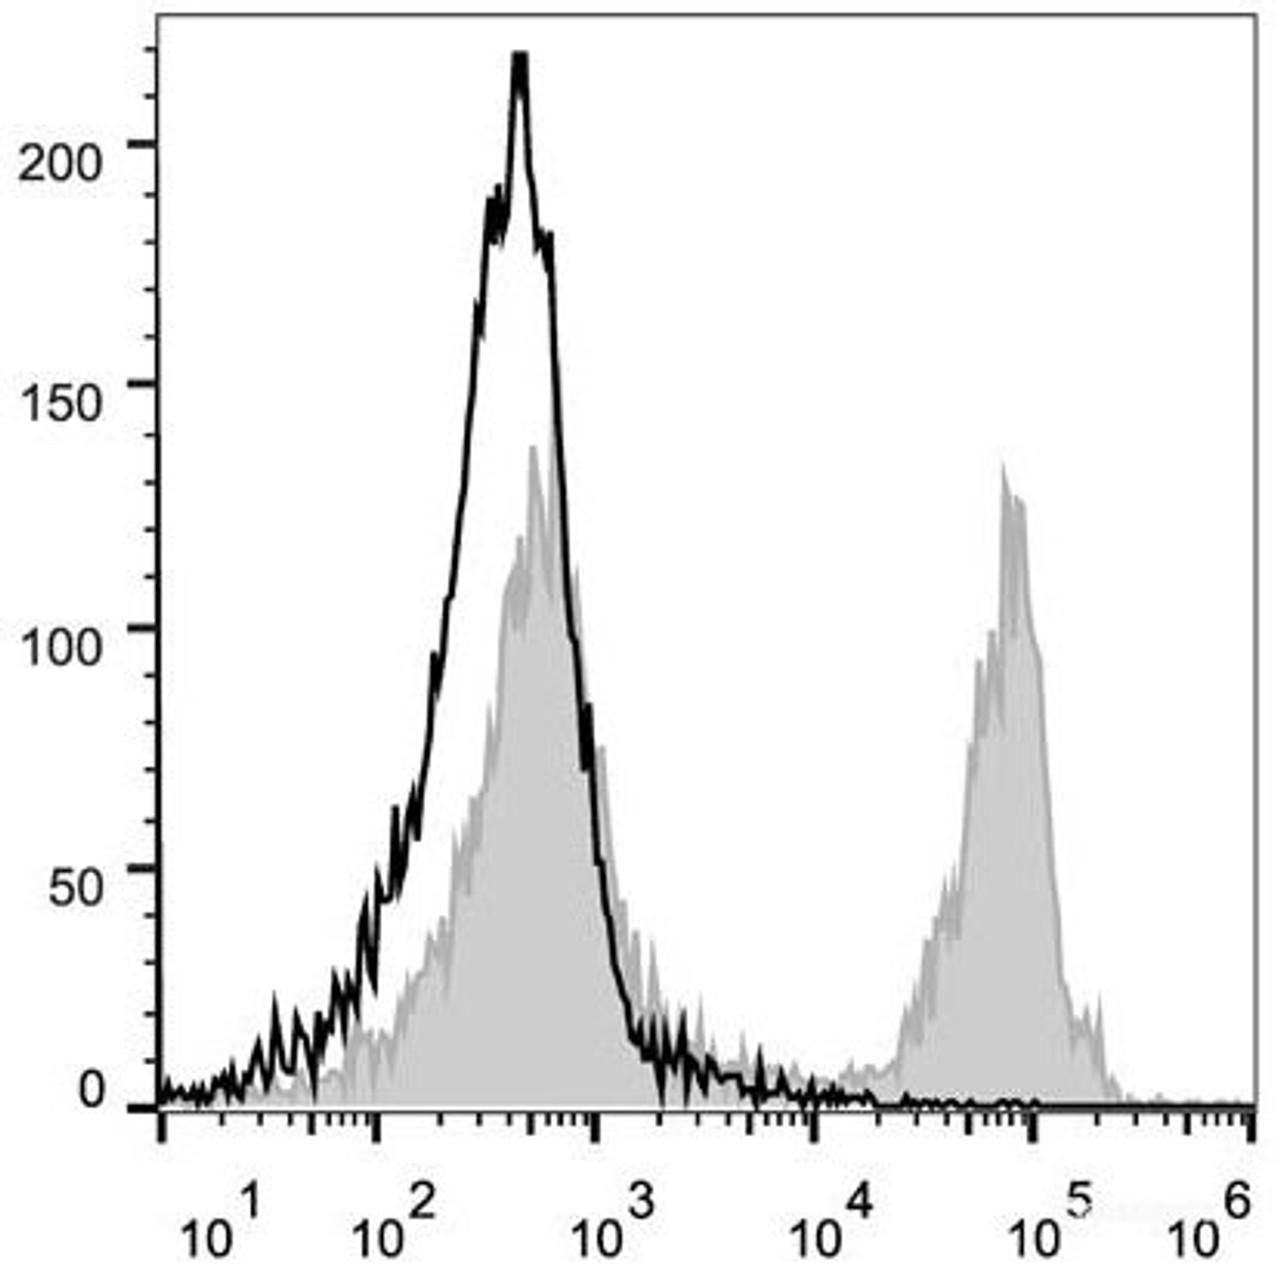 C57BL/6 murine splenocytes are stained with PE/Cyanine5 Anti-Mouse CD45R/B22 Antibody[Used at .2 μg/1<sup>6</sup> cells dilution](filled gray histogram). Unstained splenocytes (empty black histogram) are used as control.